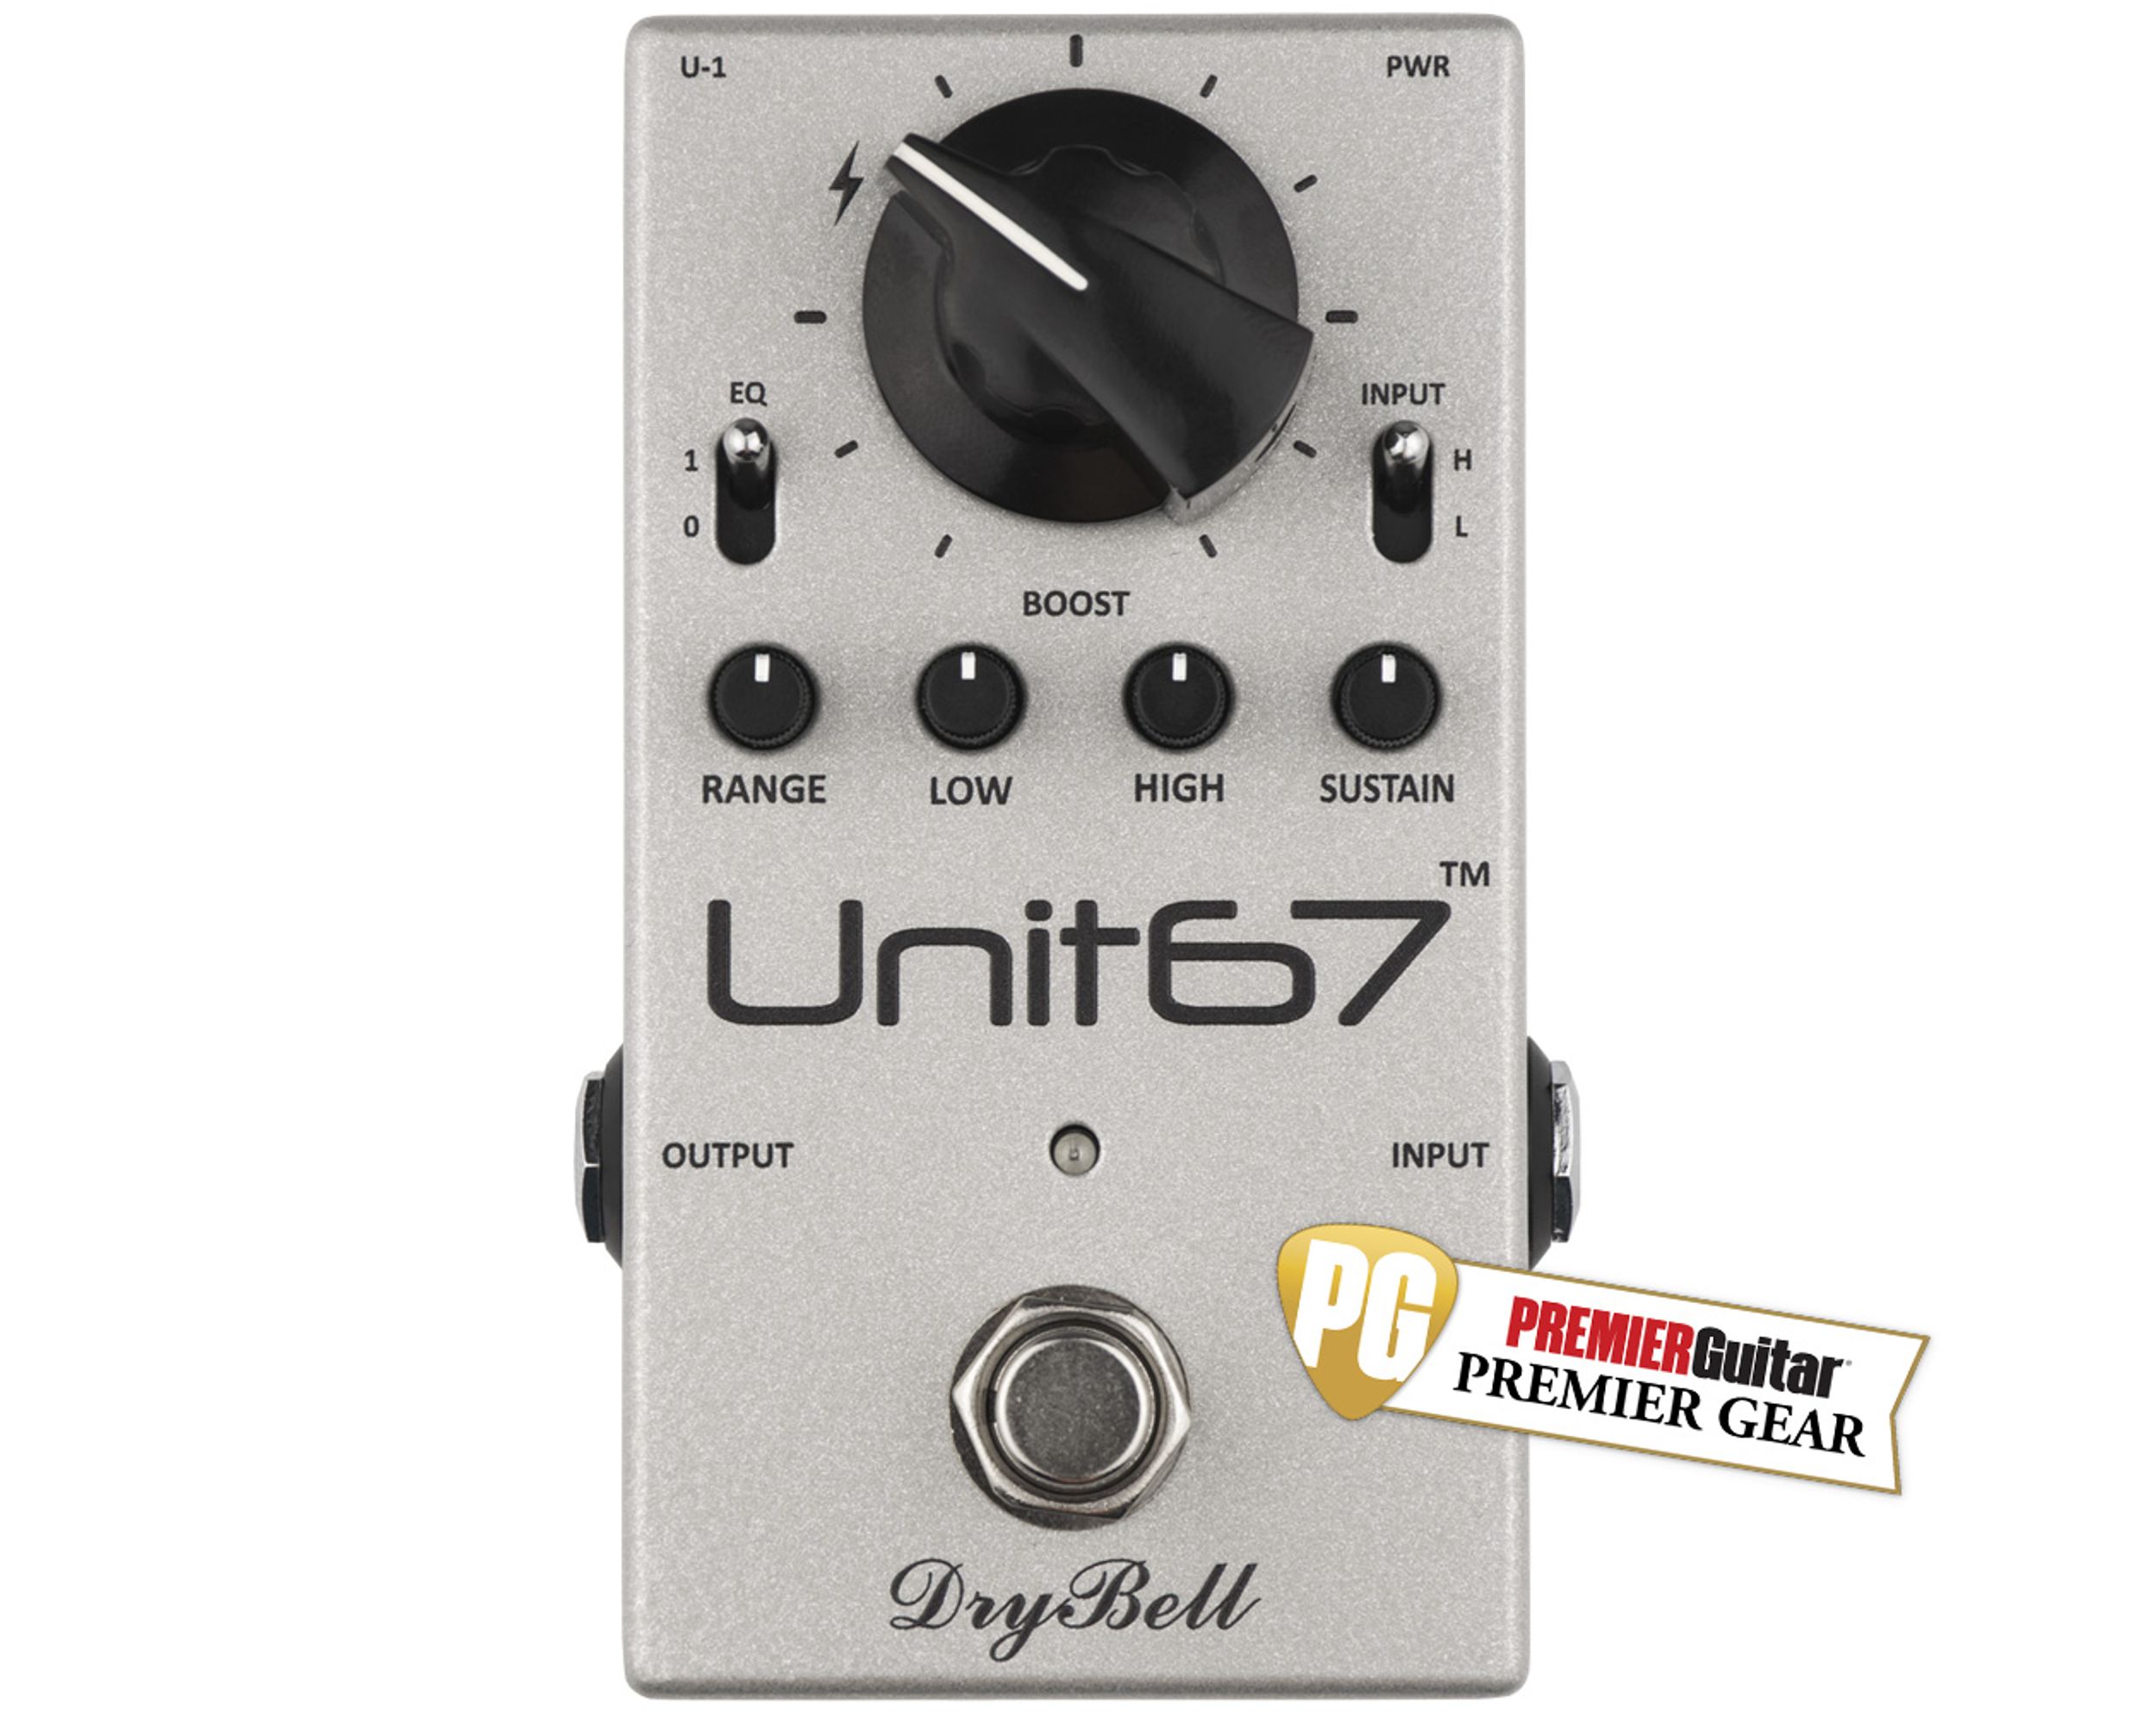 DryBell Unit67 Review